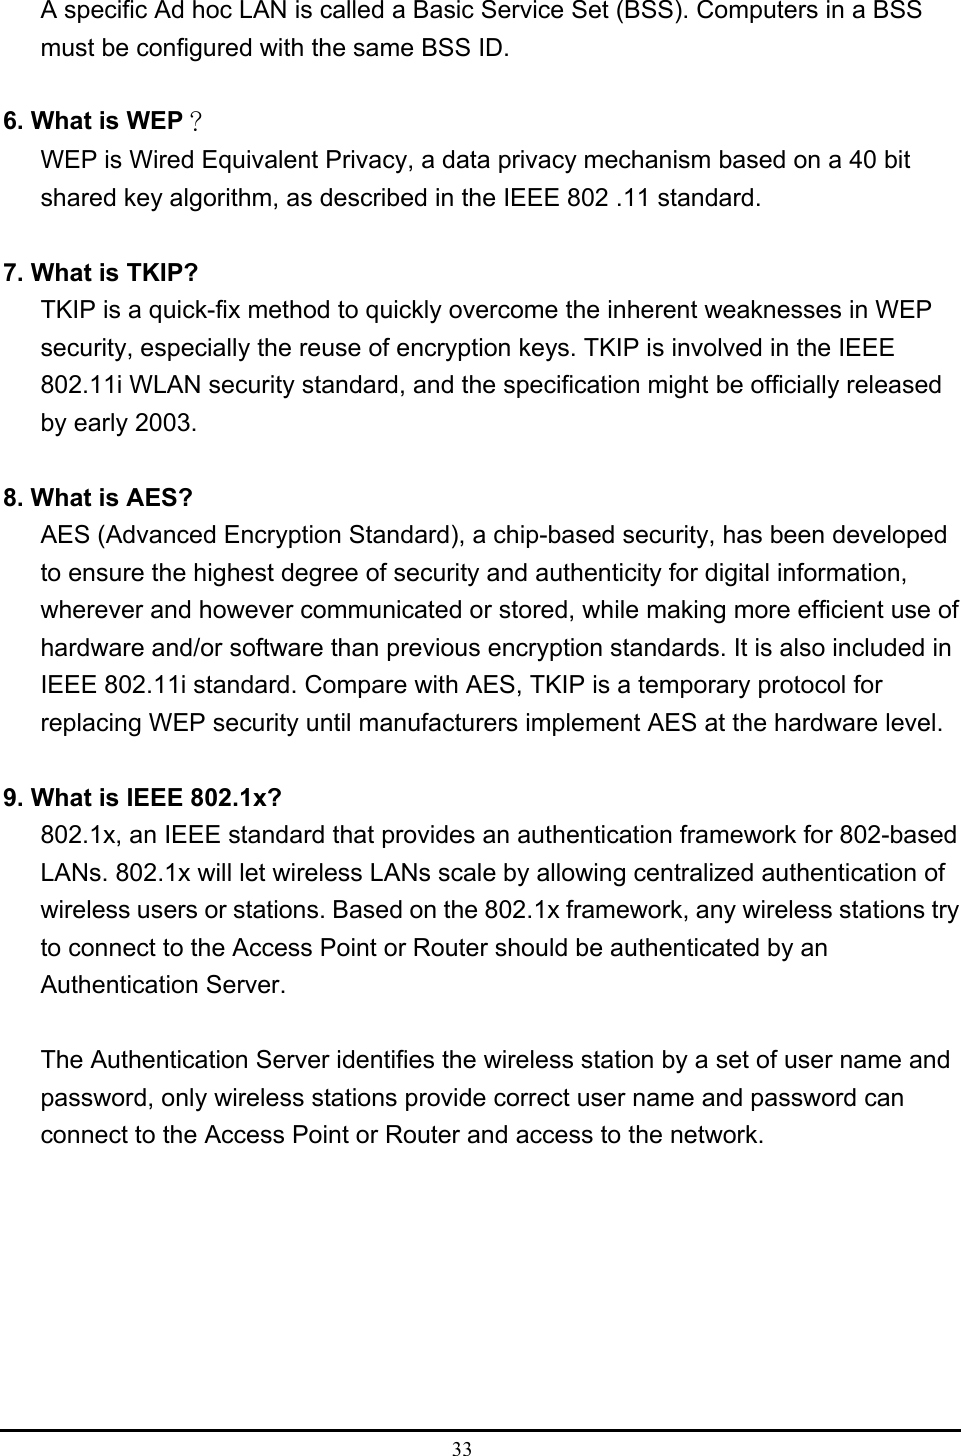  33  A specific Ad hoc LAN is called a Basic Service Set (BSS). Computers in a BSS must be configured with the same BSS ID.  6. What is WEP？ WEP is Wired Equivalent Privacy, a data privacy mechanism based on a 40 bit shared key algorithm, as described in the IEEE 802 .11 standard.  7. What is TKIP? TKIP is a quick-fix method to quickly overcome the inherent weaknesses in WEP security, especially the reuse of encryption keys. TKIP is involved in the IEEE 802.11i WLAN security standard, and the specification might be officially released by early 2003.  8. What is AES? AES (Advanced Encryption Standard), a chip-based security, has been developed to ensure the highest degree of security and authenticity for digital information, wherever and however communicated or stored, while making more efficient use of hardware and/or software than previous encryption standards. It is also included in IEEE 802.11i standard. Compare with AES, TKIP is a temporary protocol for replacing WEP security until manufacturers implement AES at the hardware level.  9. What is IEEE 802.1x? 802.1x, an IEEE standard that provides an authentication framework for 802-based LANs. 802.1x will let wireless LANs scale by allowing centralized authentication of wireless users or stations. Based on the 802.1x framework, any wireless stations try to connect to the Access Point or Router should be authenticated by an Authentication Server.  The Authentication Server identifies the wireless station by a set of user name and password, only wireless stations provide correct user name and password can connect to the Access Point or Router and access to the network. 